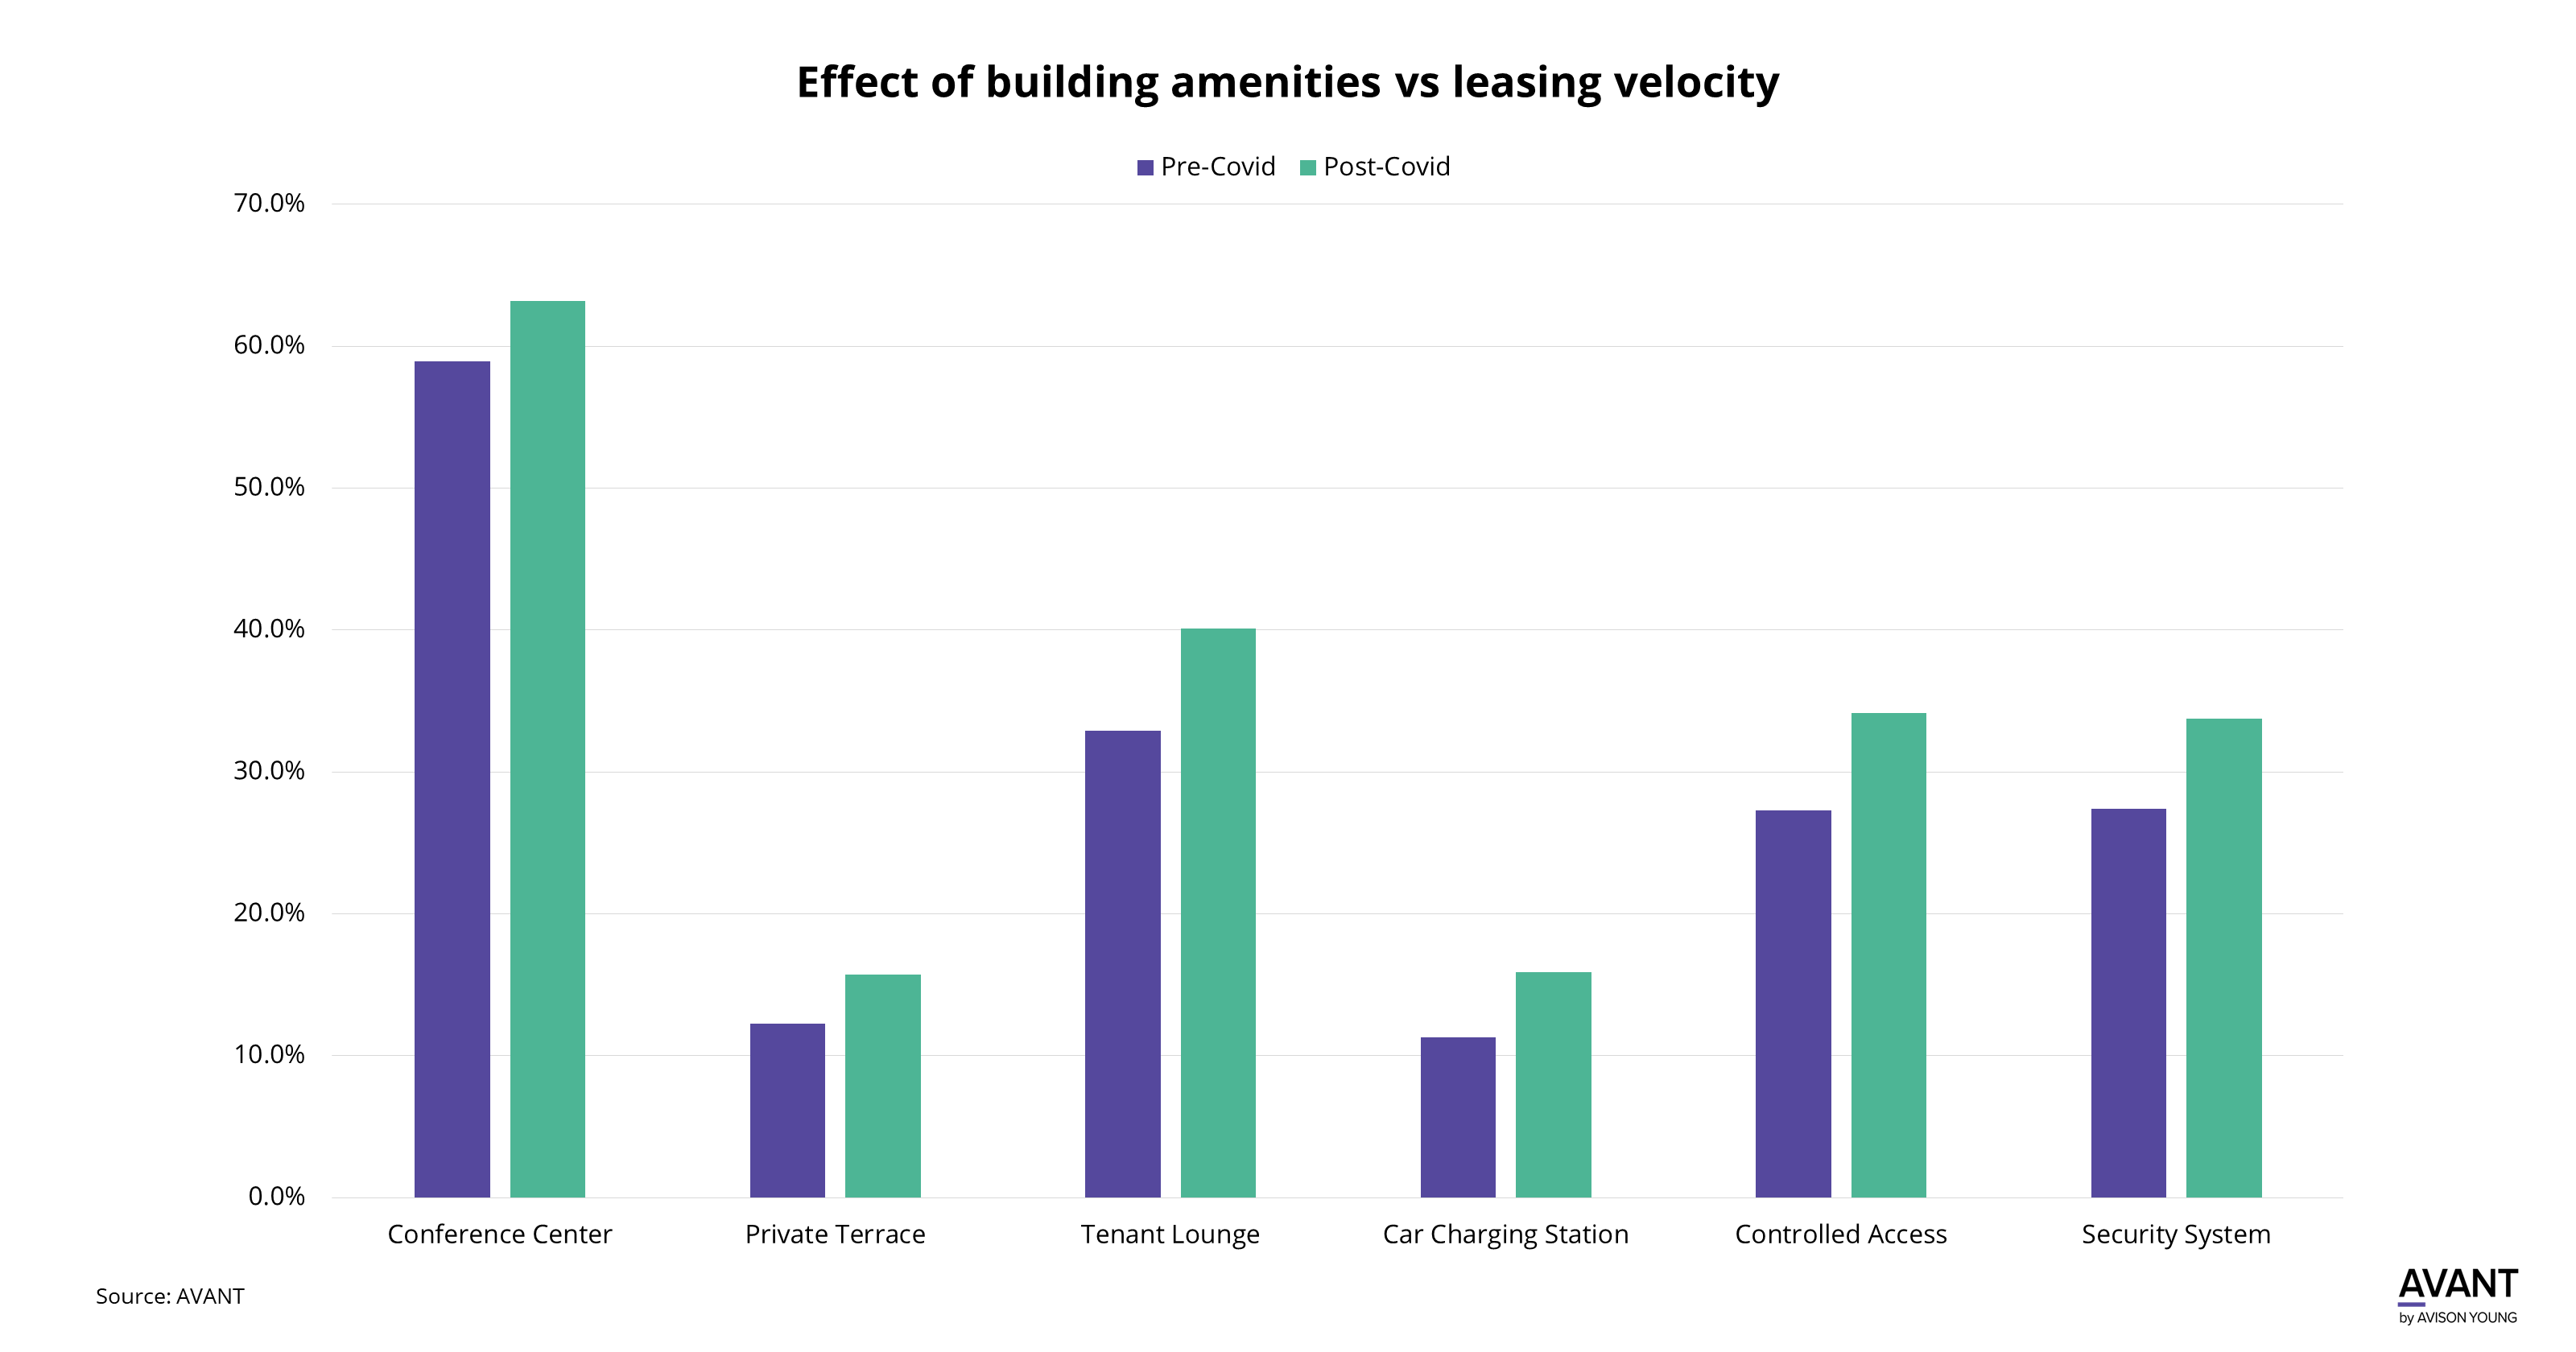 Graph representing how leasing velocity has increased in urban office buildings within the DC metro region that include conference centers, private terraces, tenant lounges, car charging stations, controlled access, and security systems.